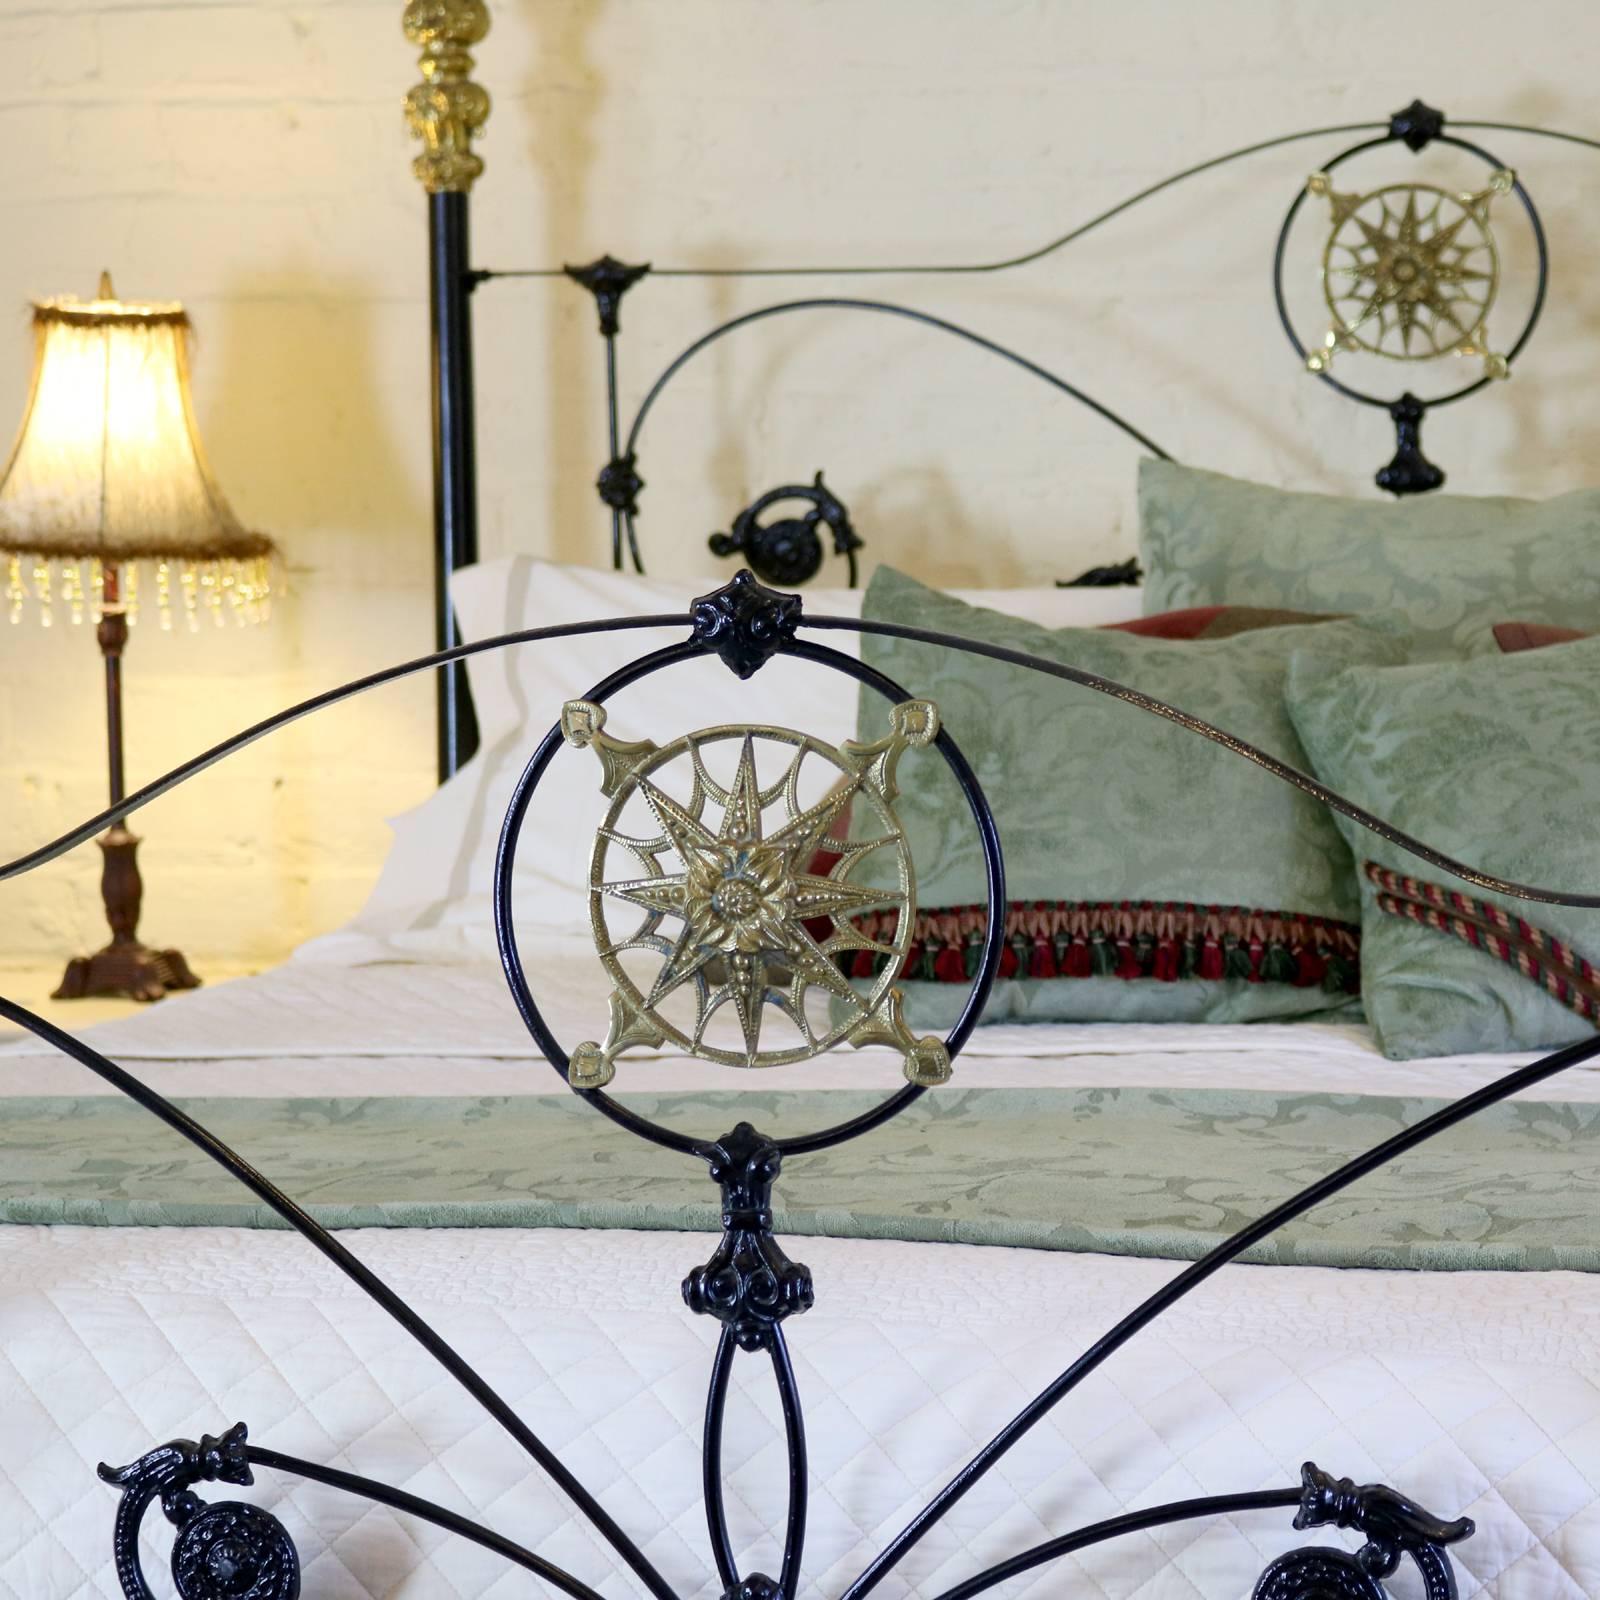 dating antique iron beds